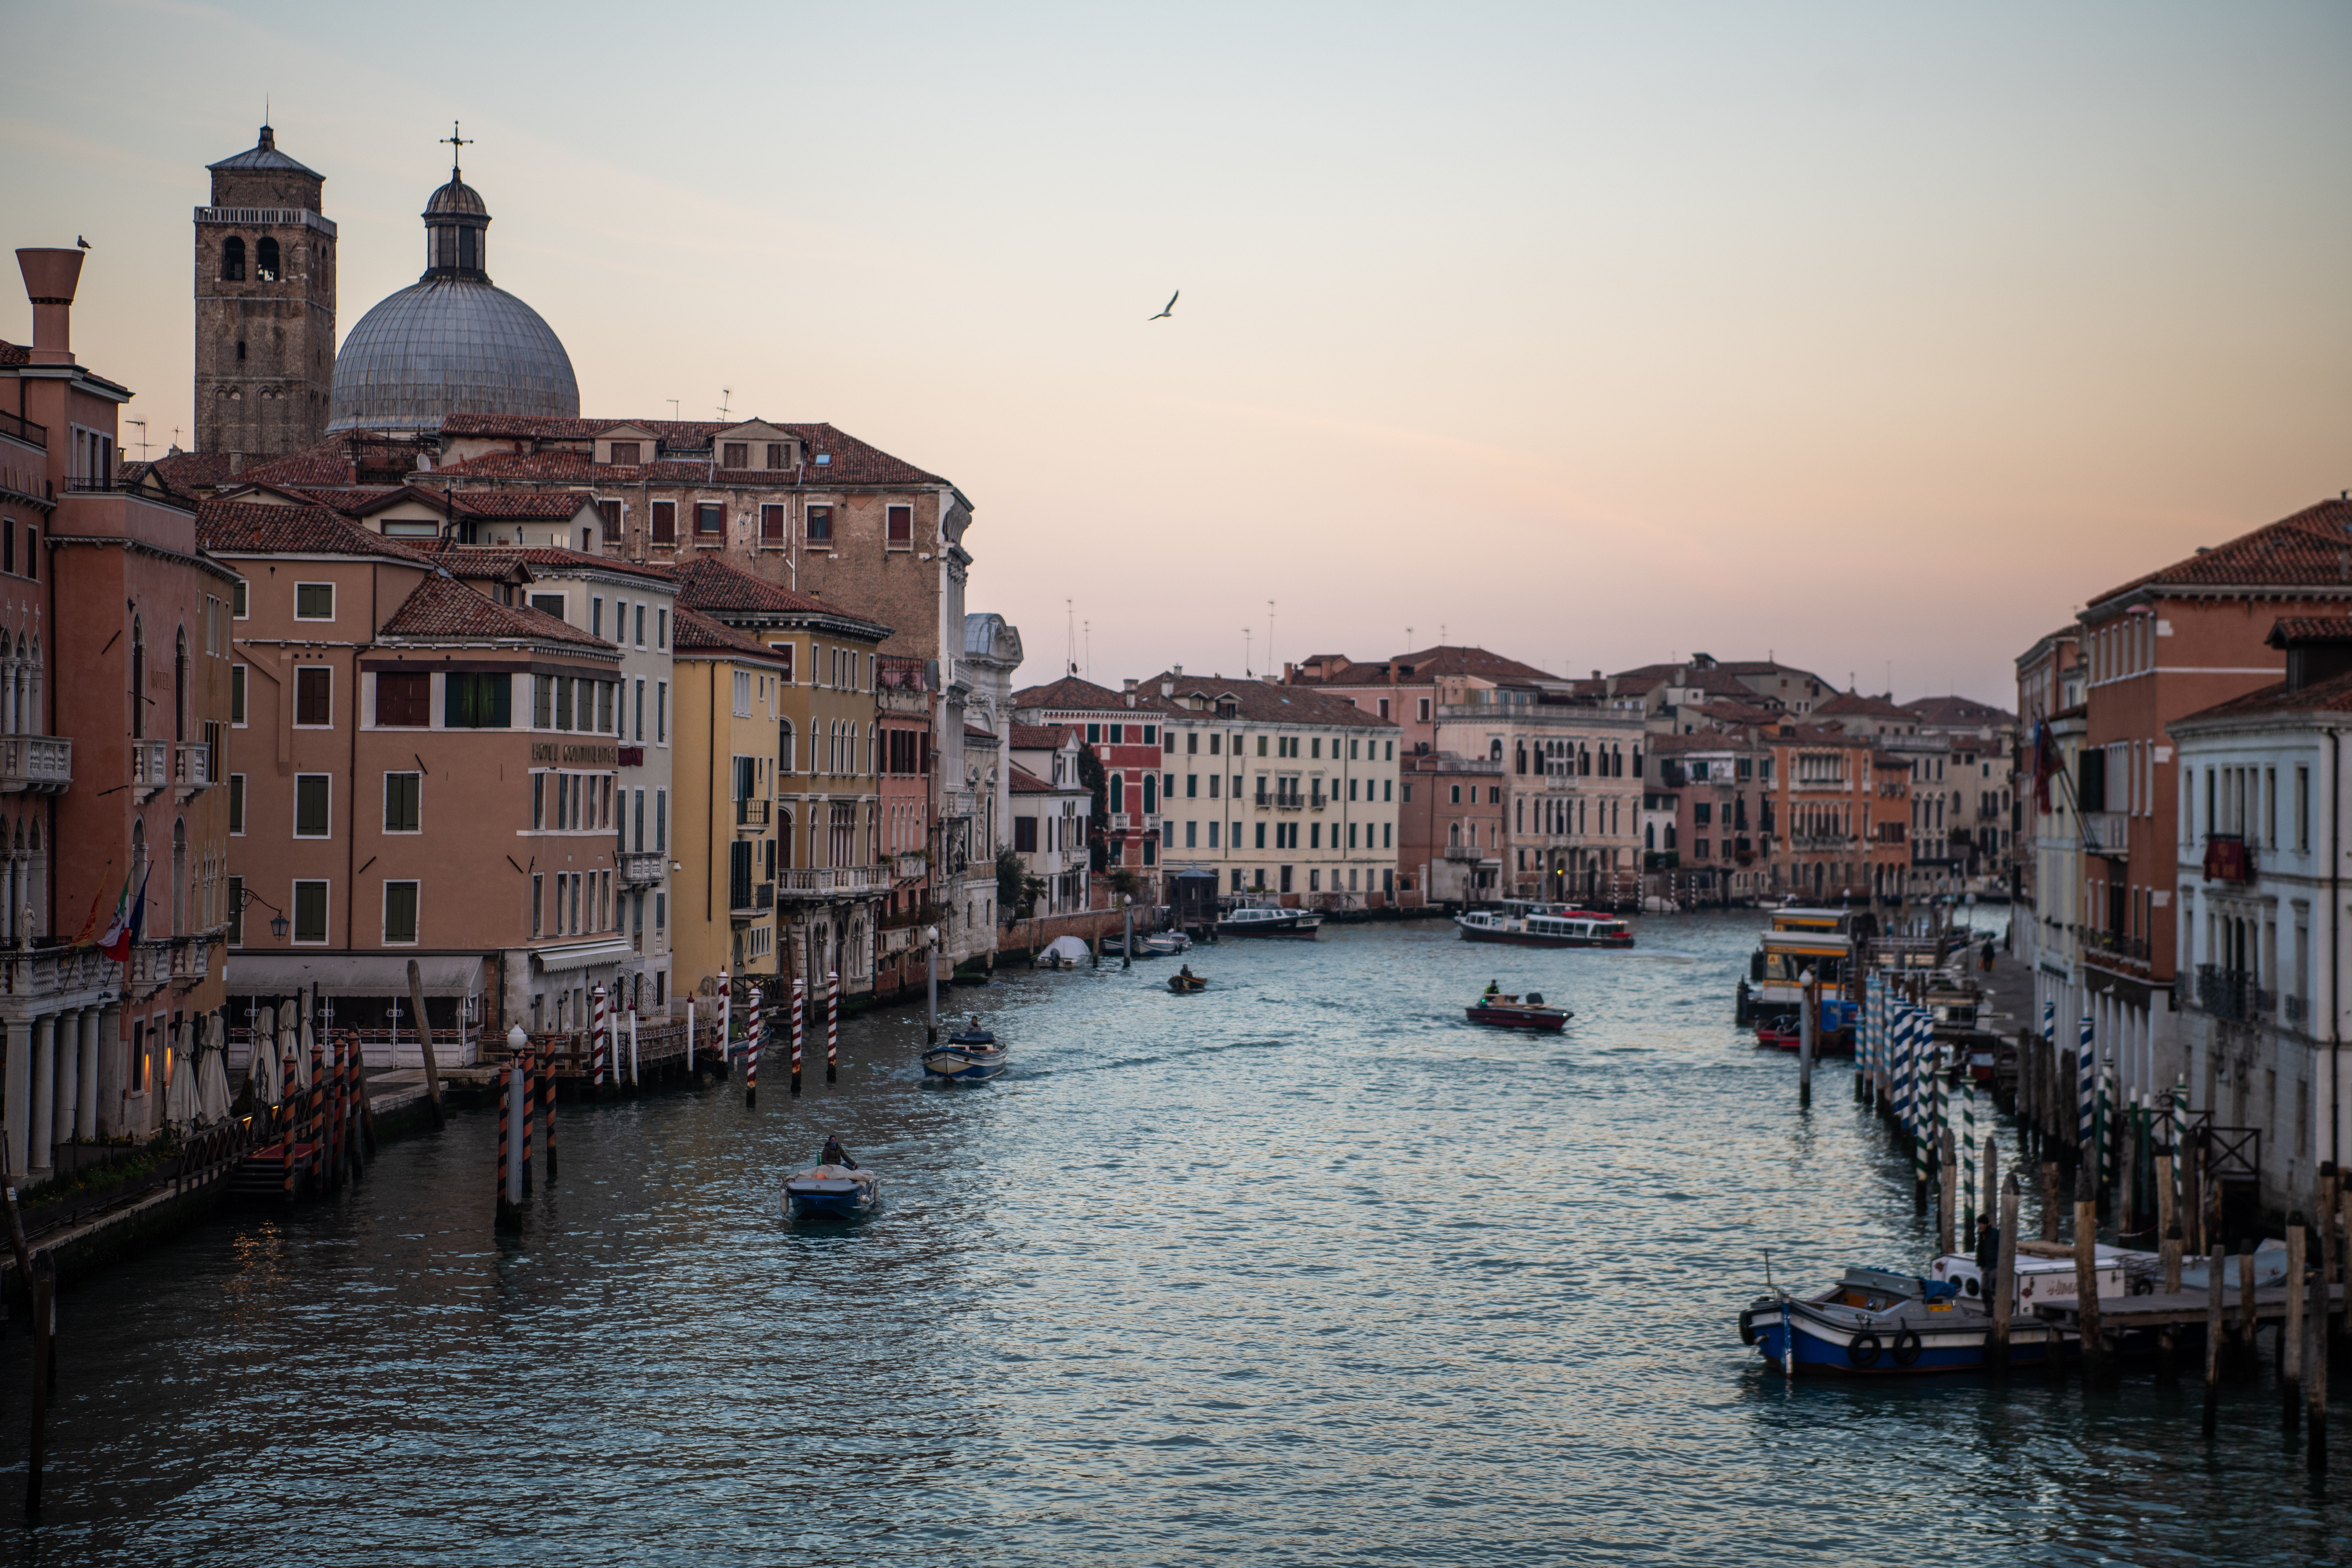 Venice is an extremely popular tourist destination